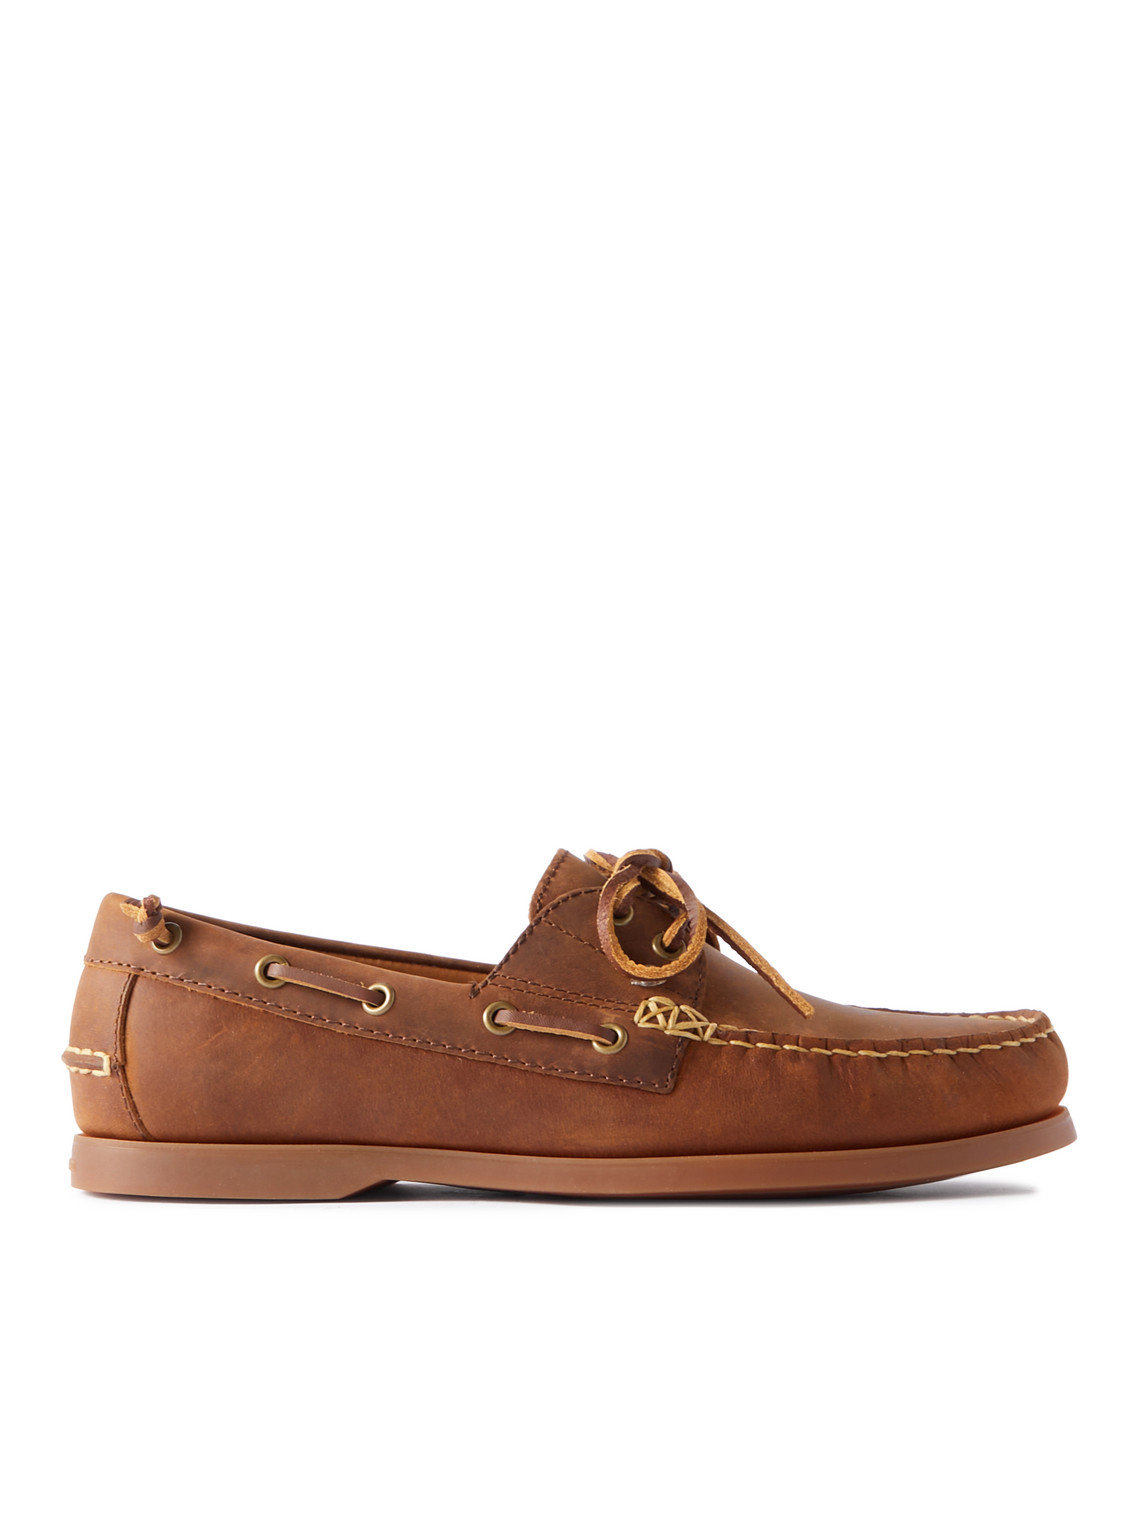 Merton Leather Boat Shoes